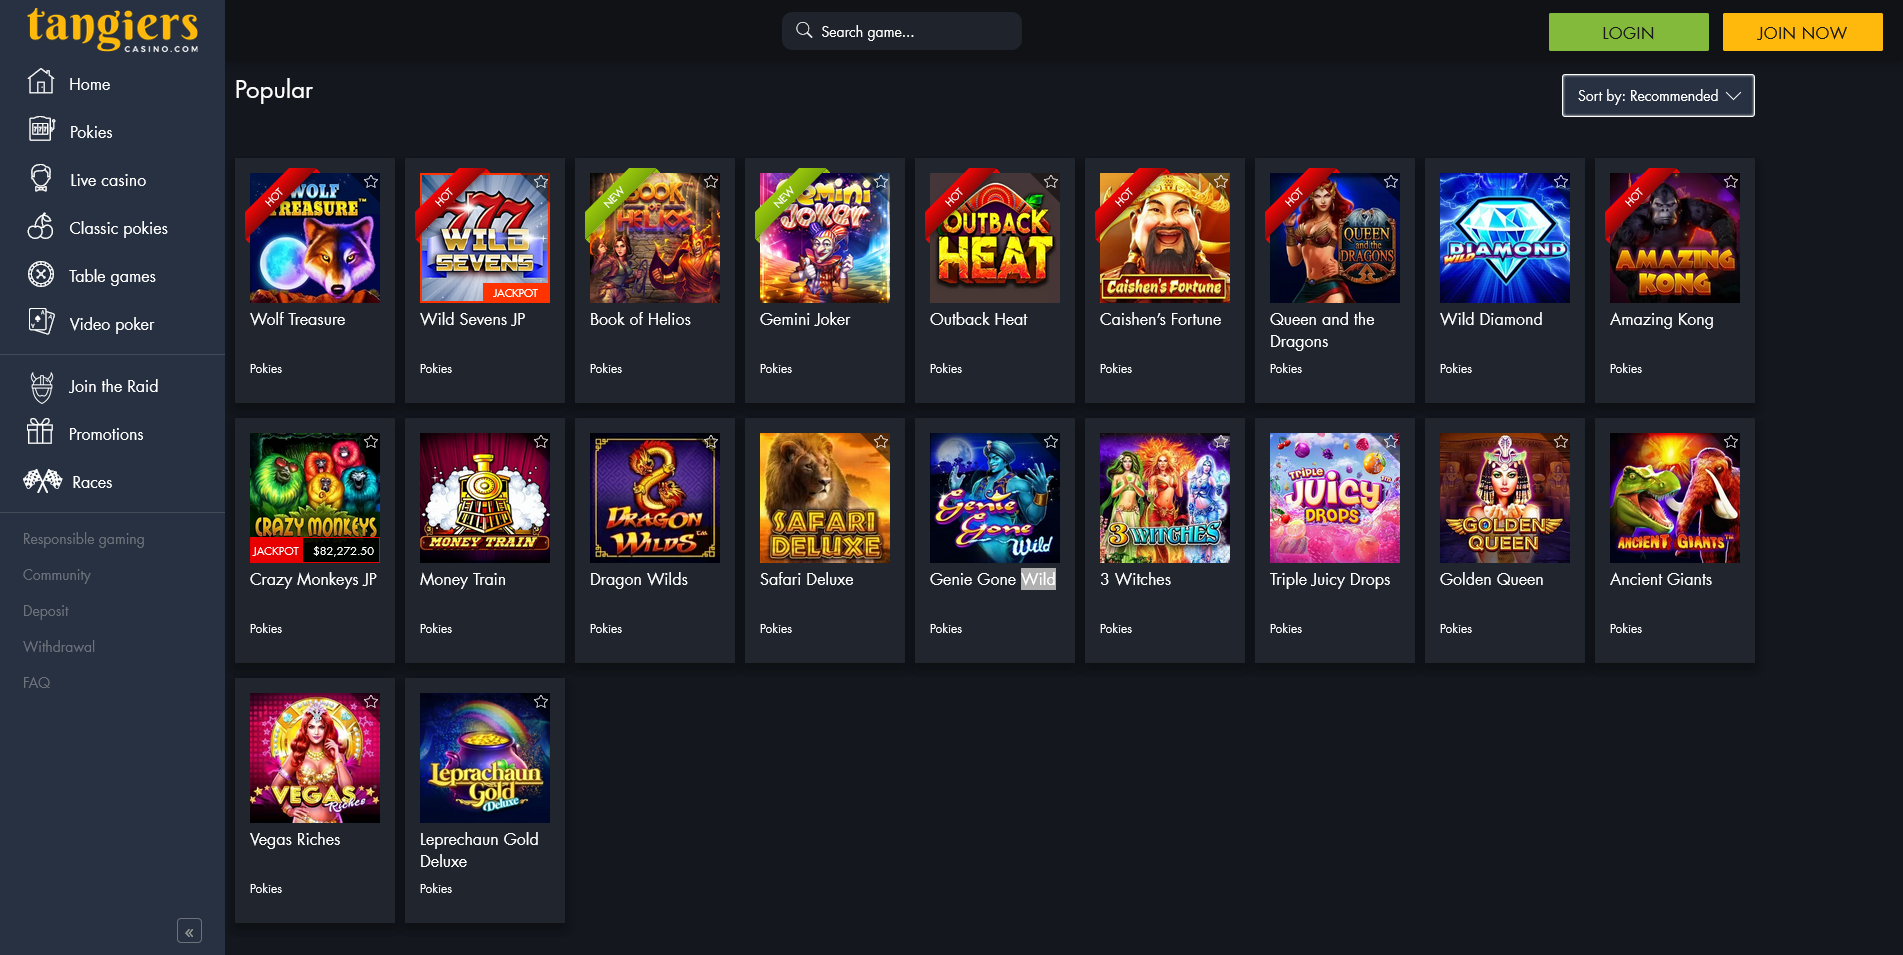 Screenshot of Game Section Page on Tangiers Casino site